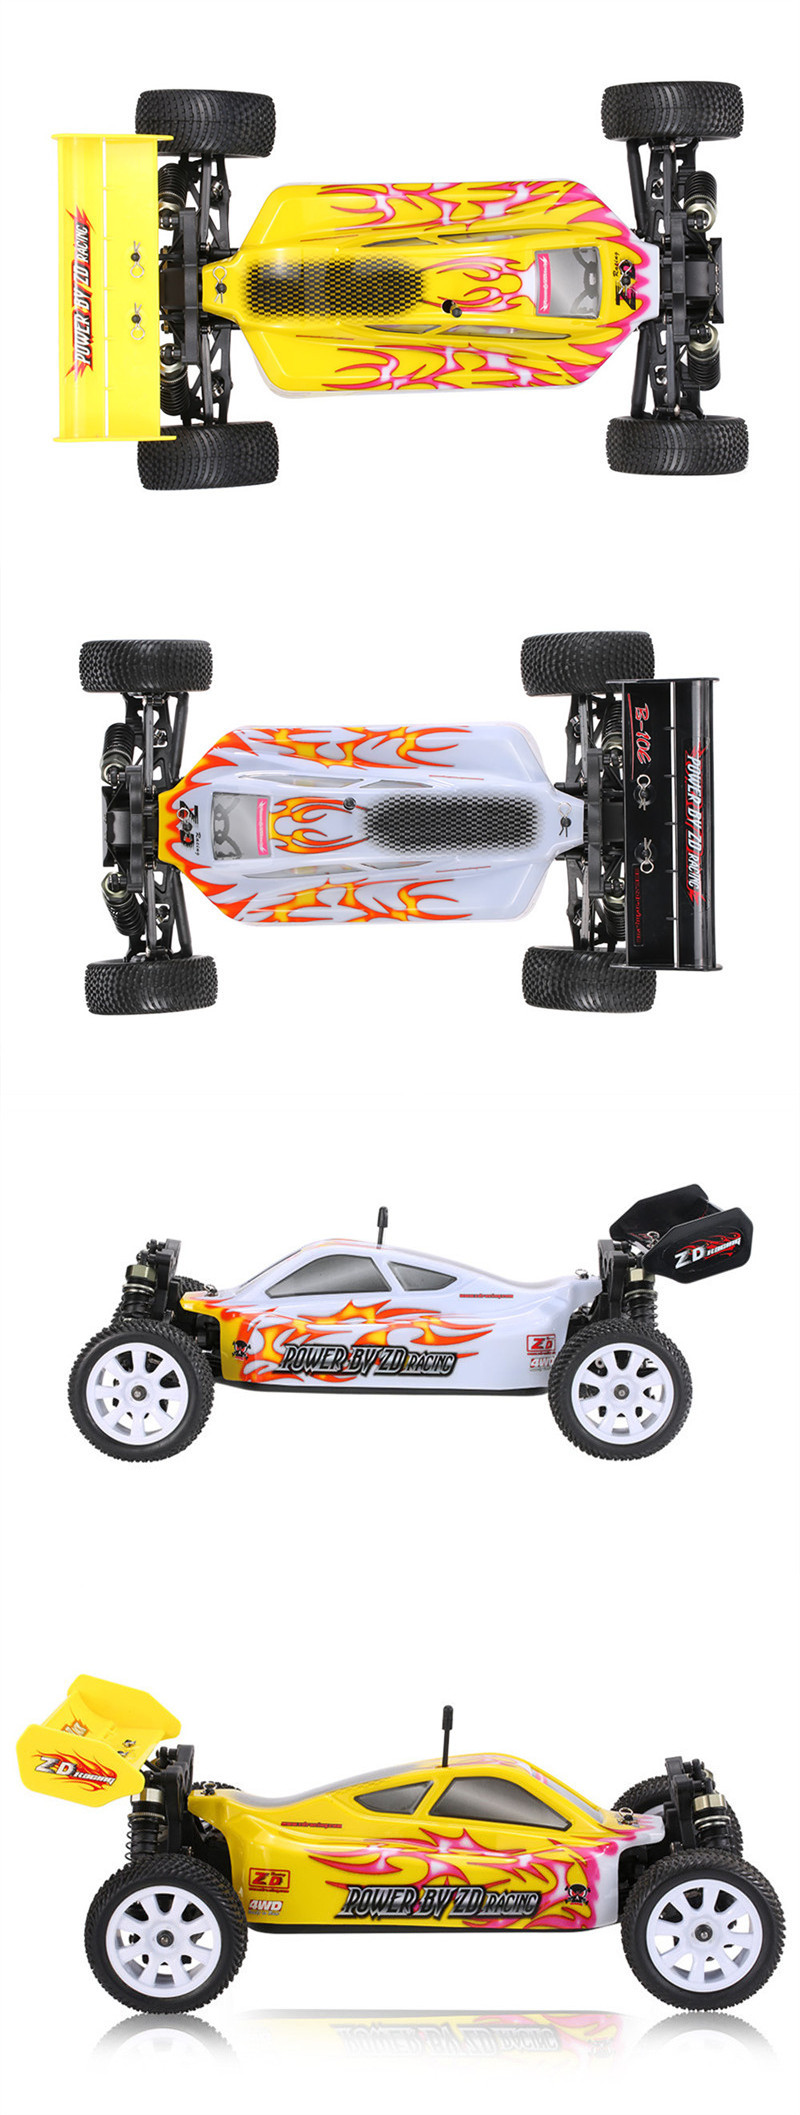 ZD Racing 9102 Thunder B-10E DIY Car Kit 2.4G 4WD 1/10 Scale RC Off Road Buggy Without Electronic Parts - Photo: 2